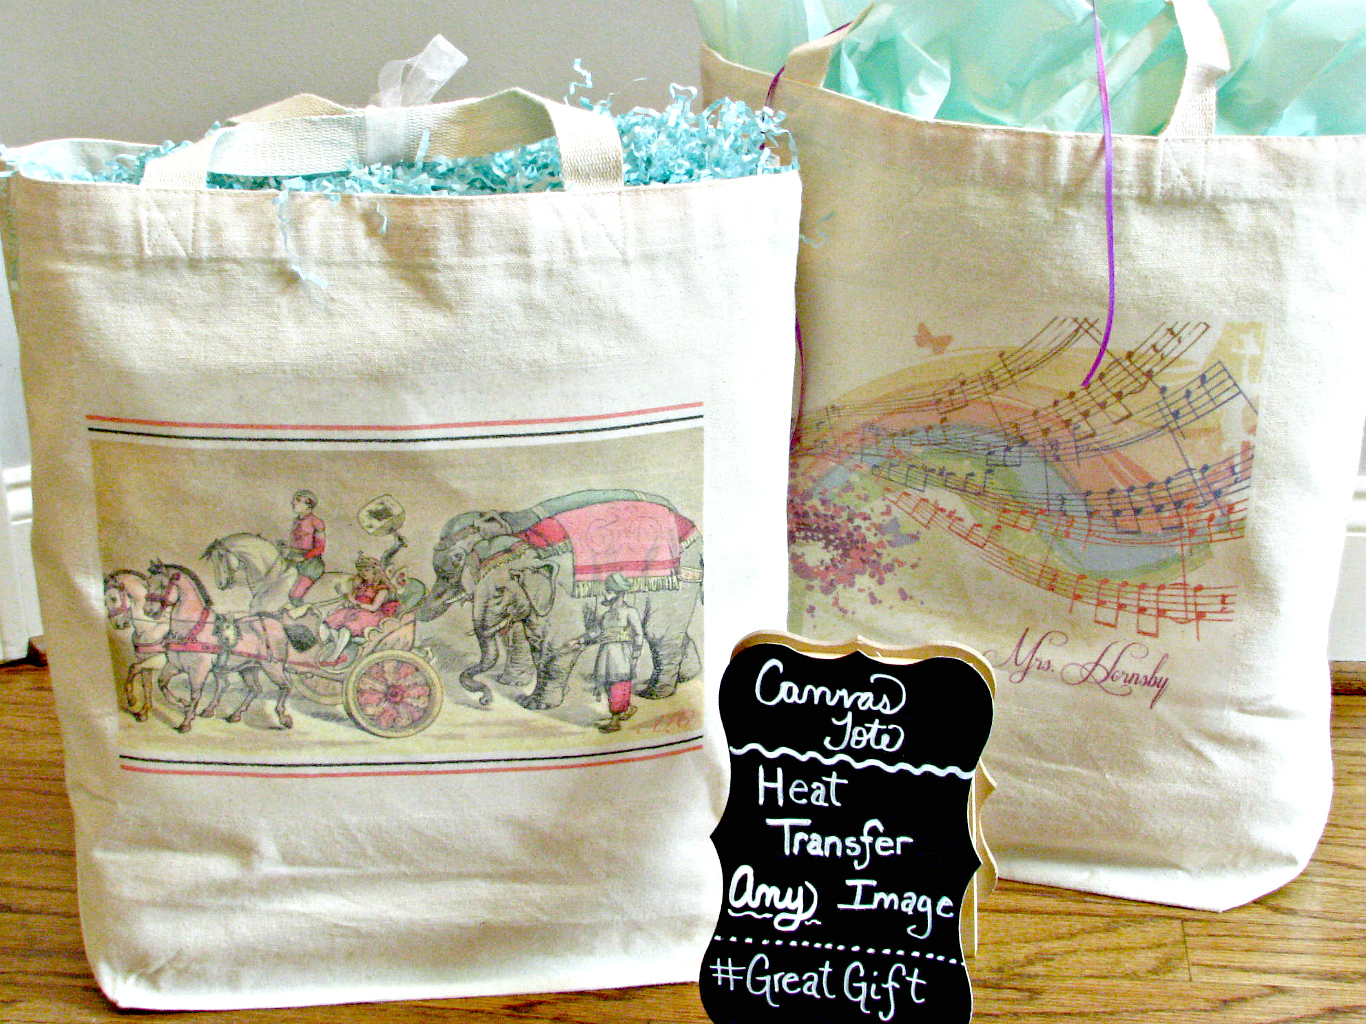 DIY Iron Transfer Canvas Tote Bags — Life is Made with Katie Miles